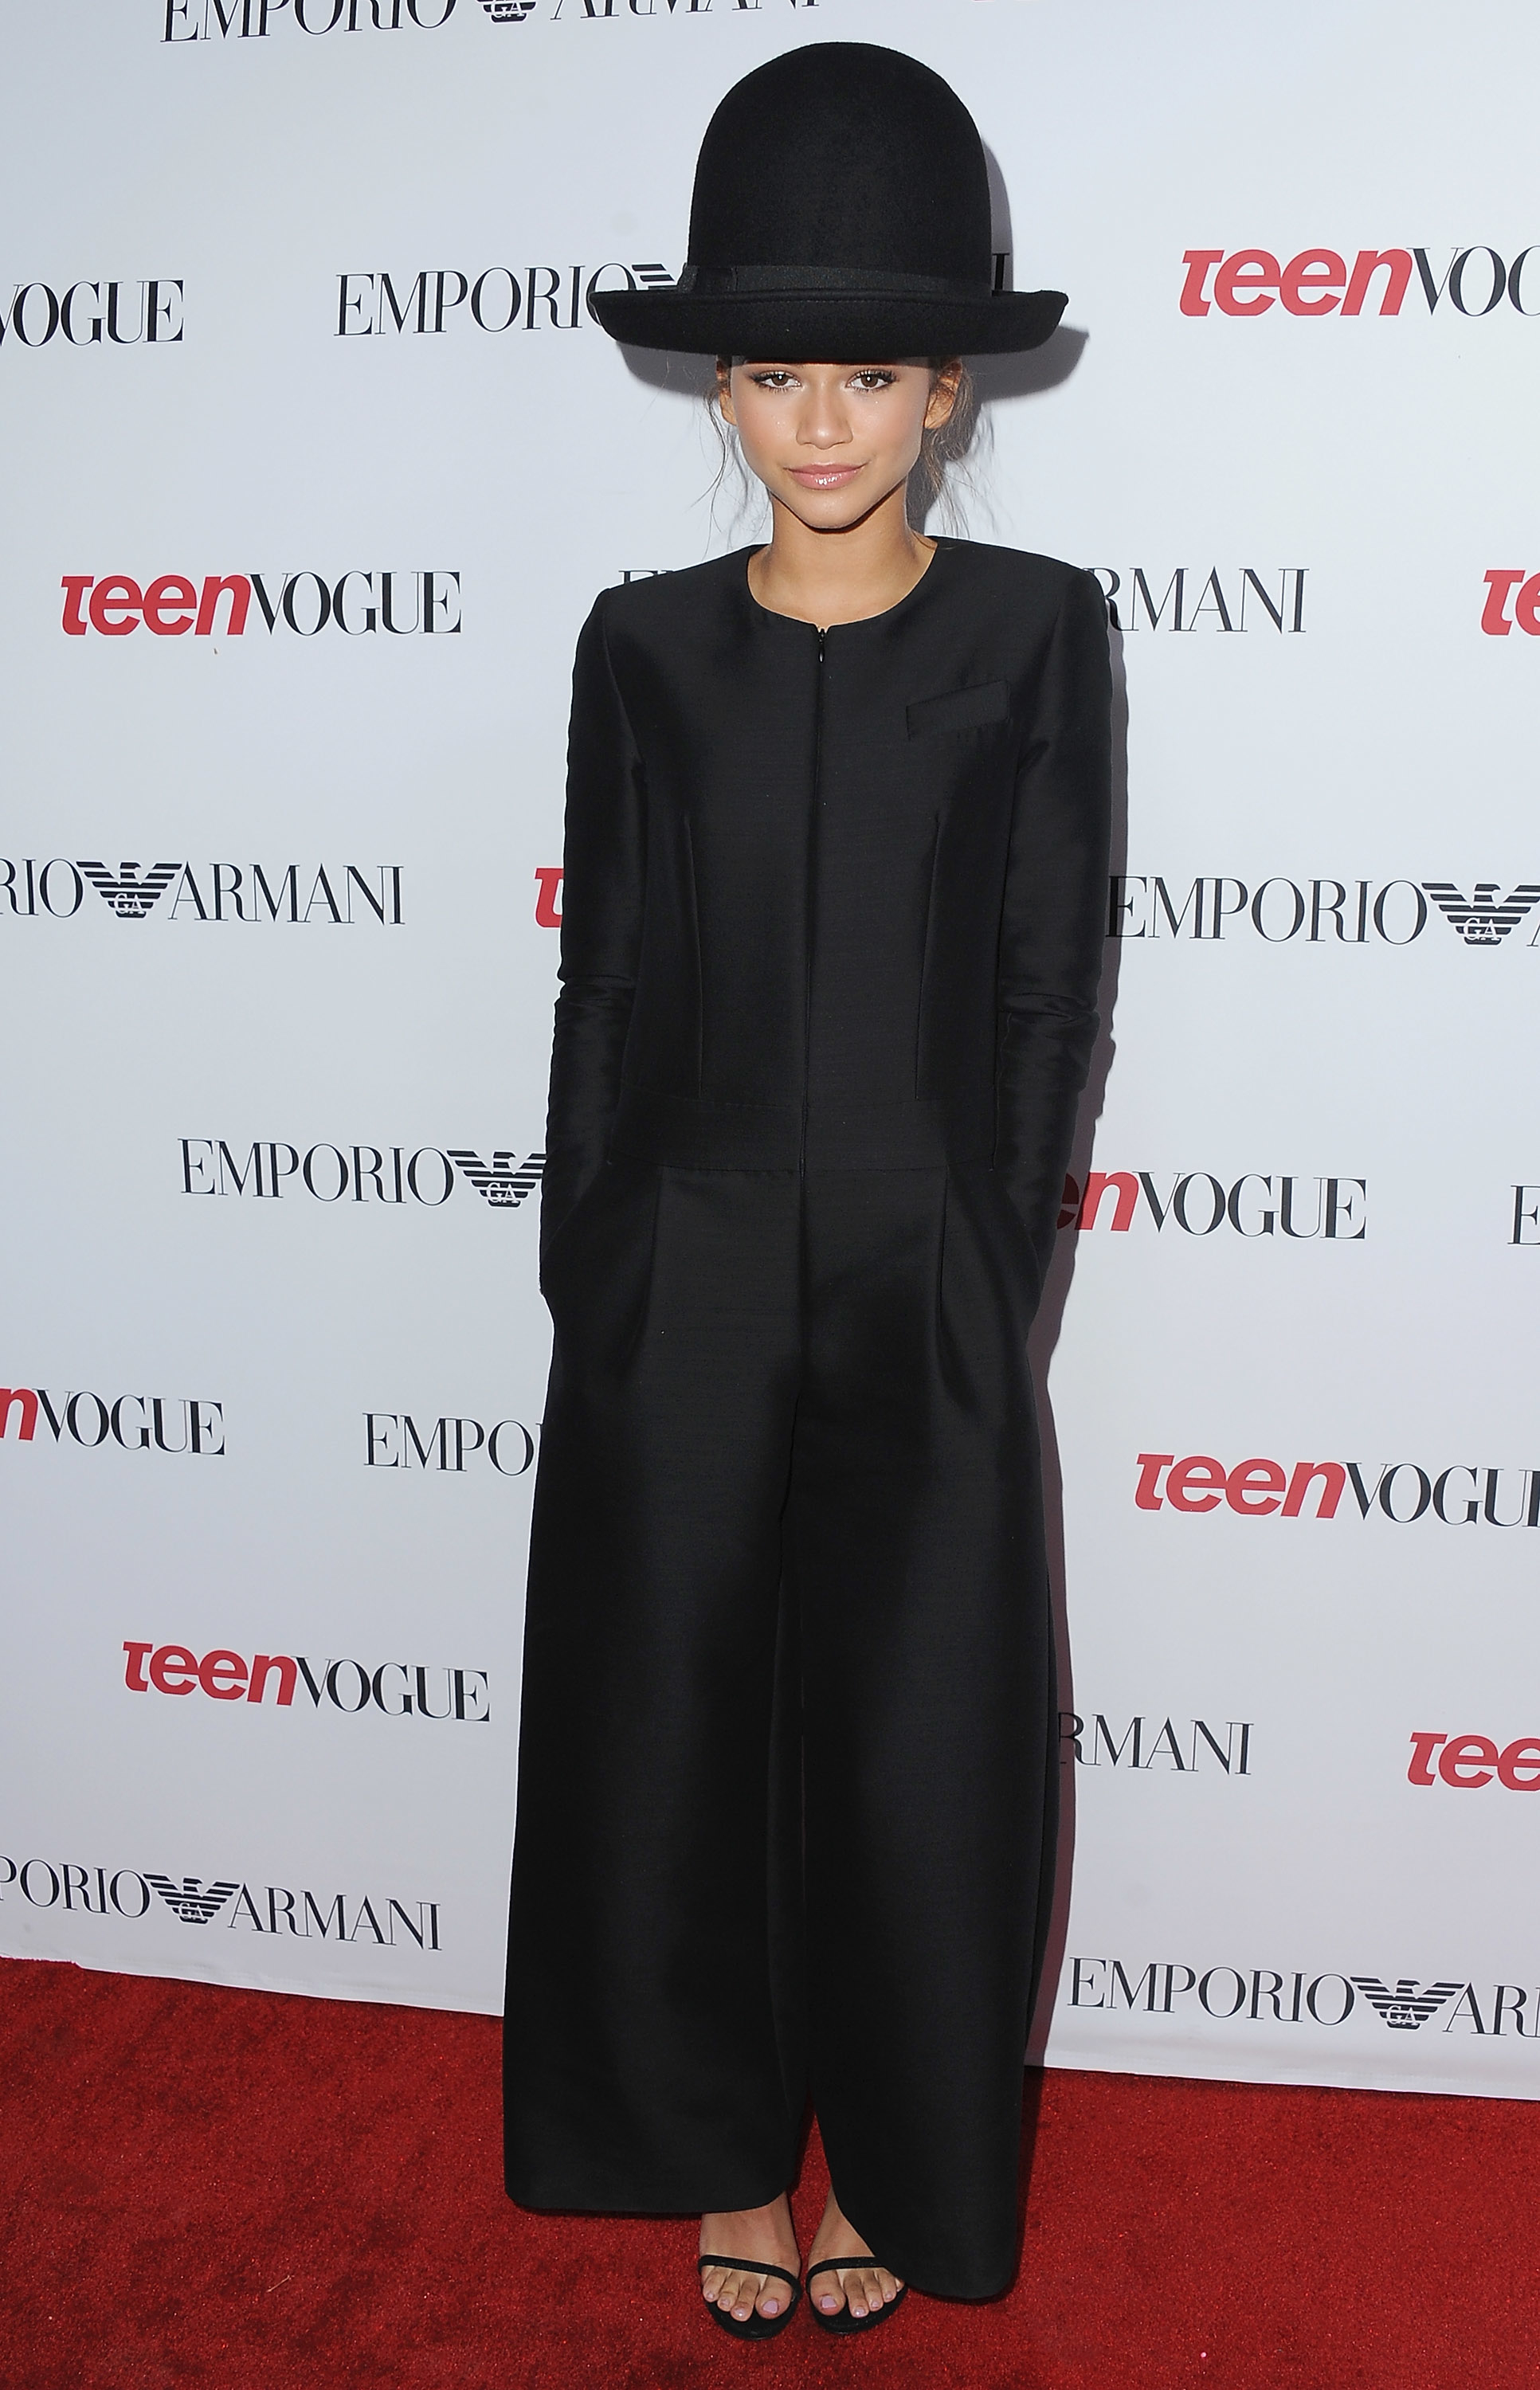 Person in a wide-brimmed hat and tailored black outfit at a fashion event